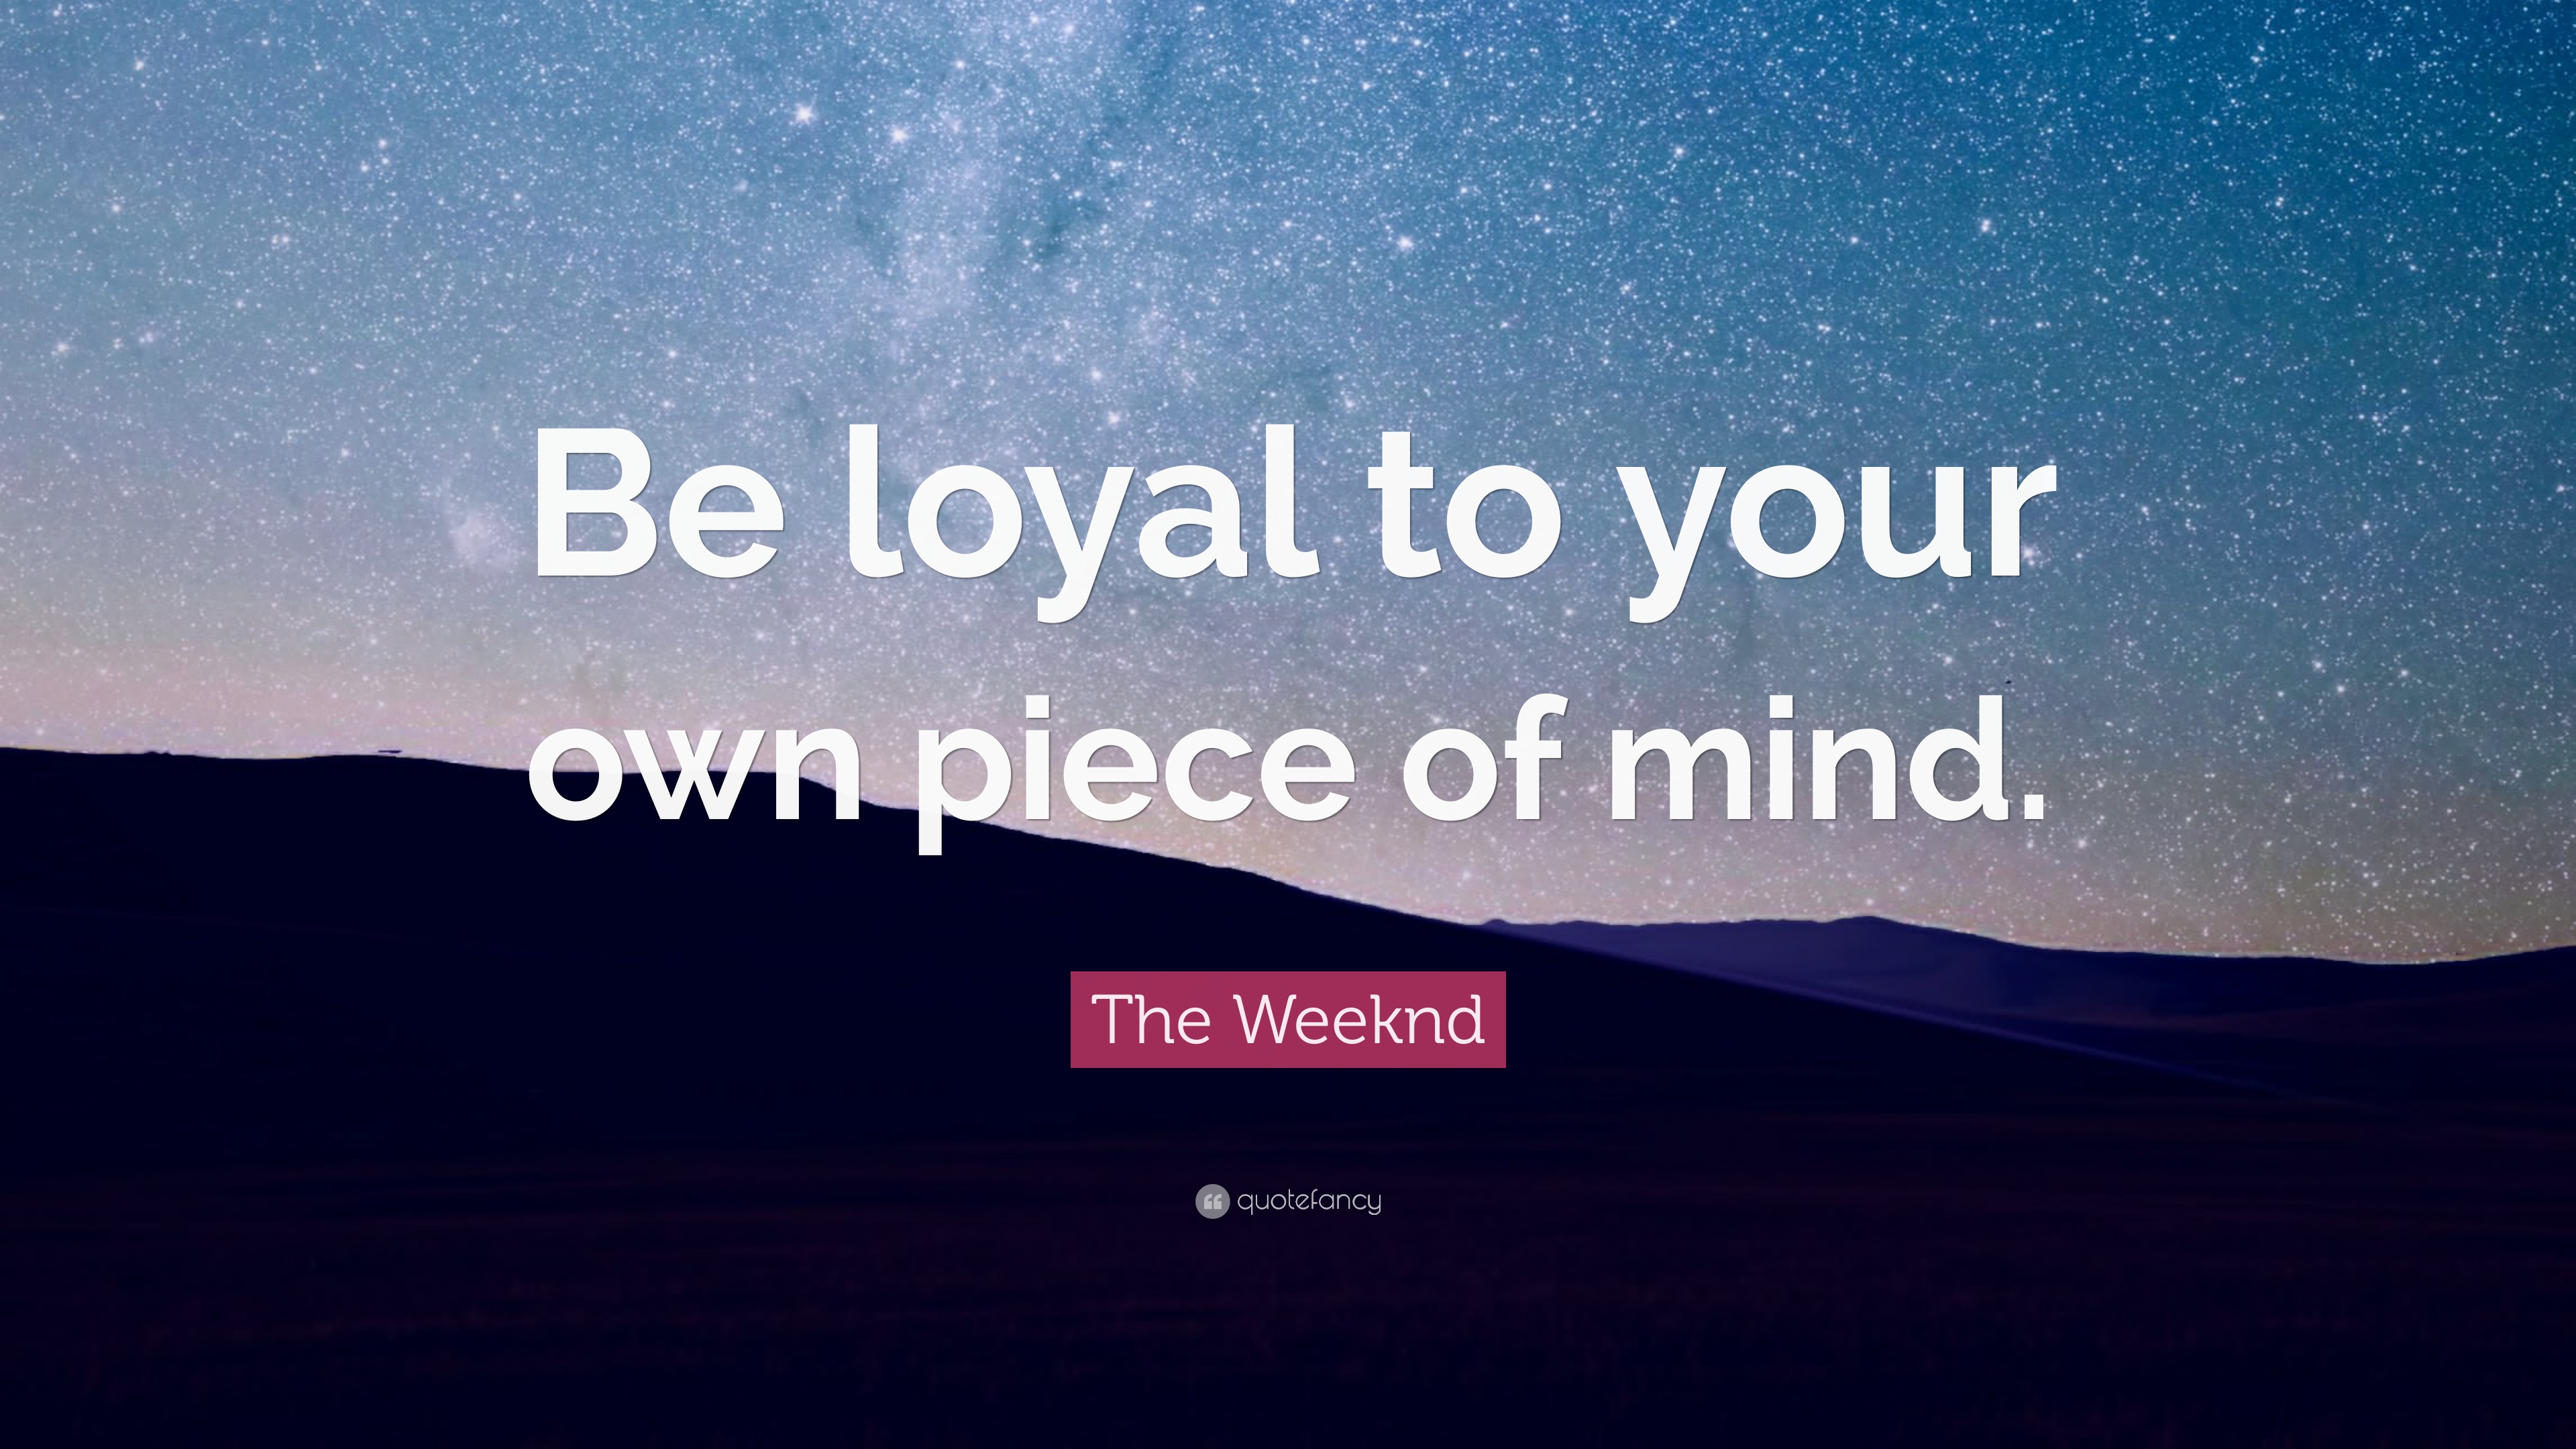 5 The Weeknd Quotes About Life